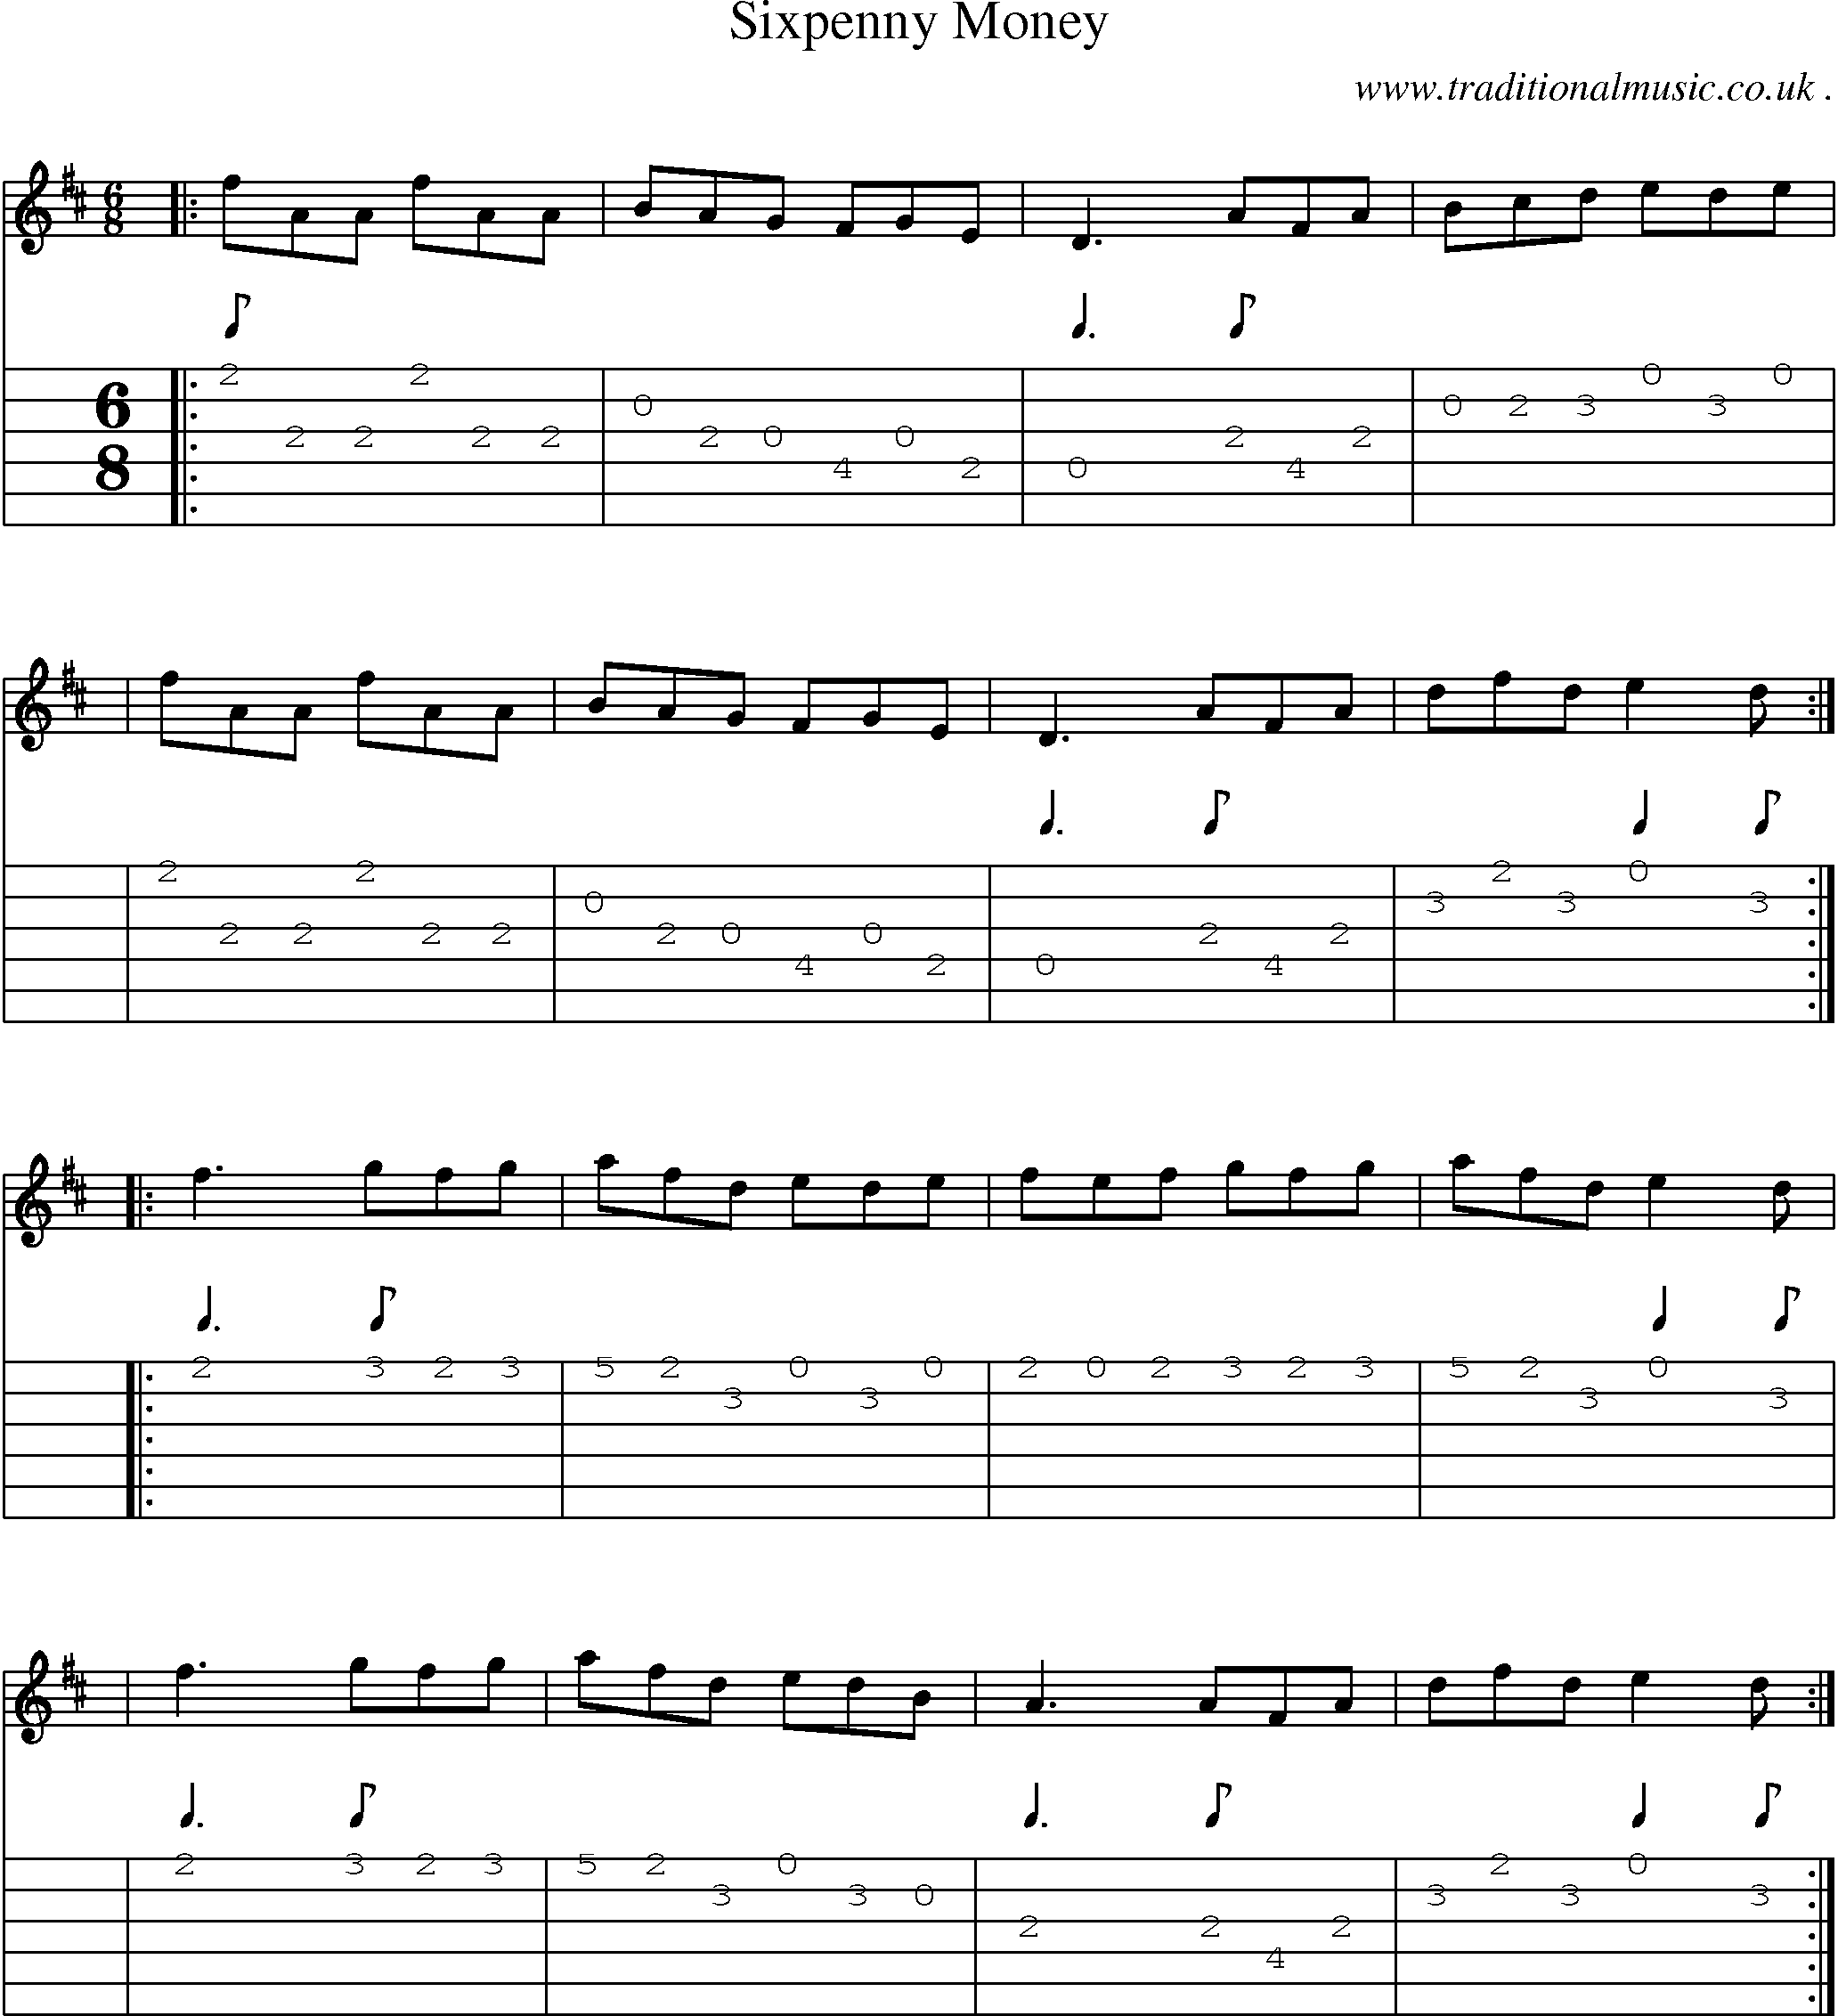 Sheet-Music and Guitar Tabs for Sixpenny Money